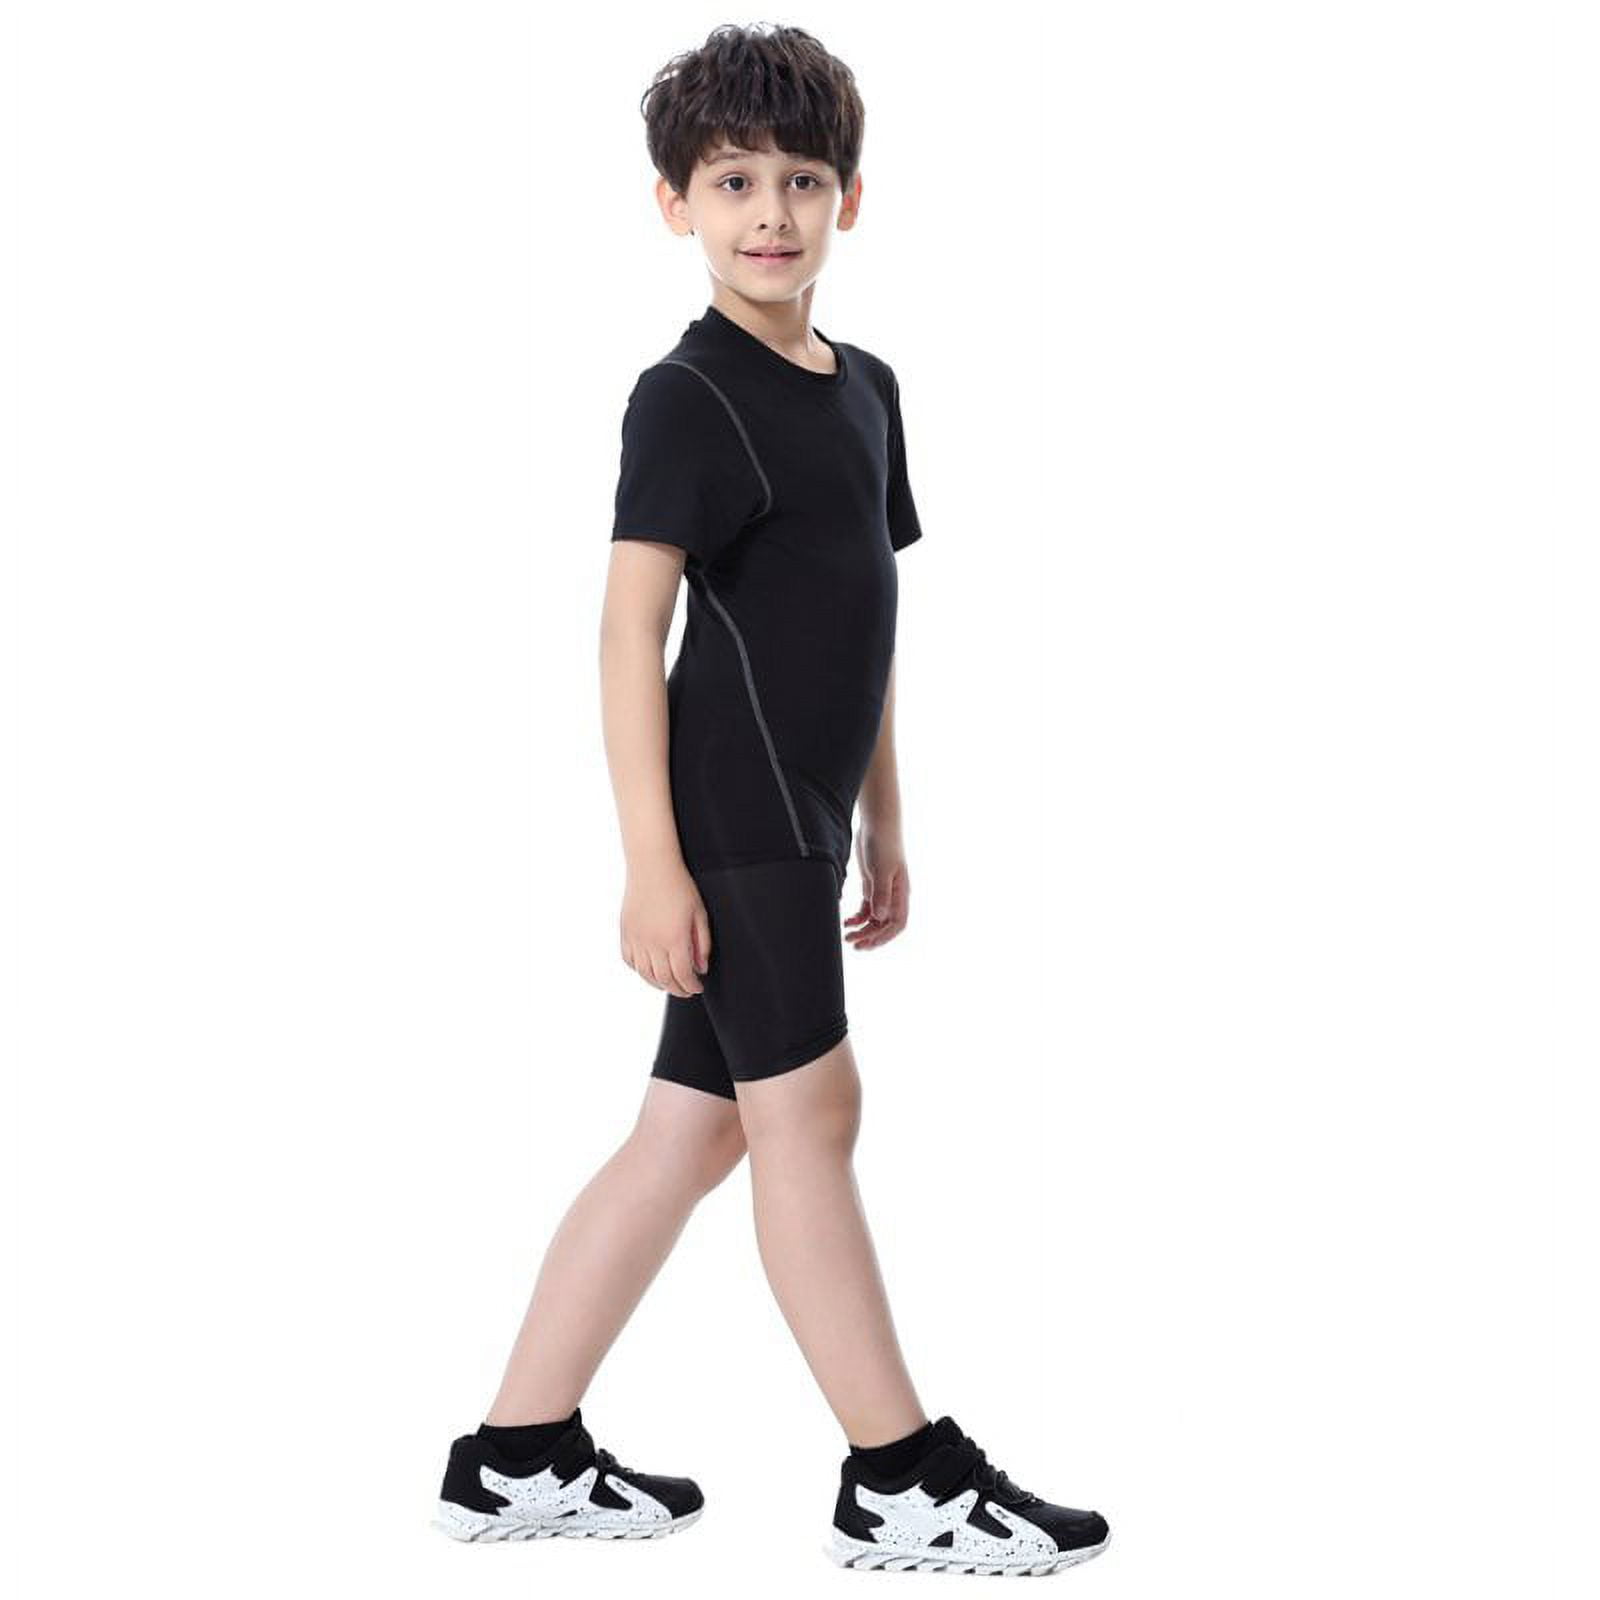 Hovershoes Youth Boys Compression Shorts,Spandex Athletic Kids